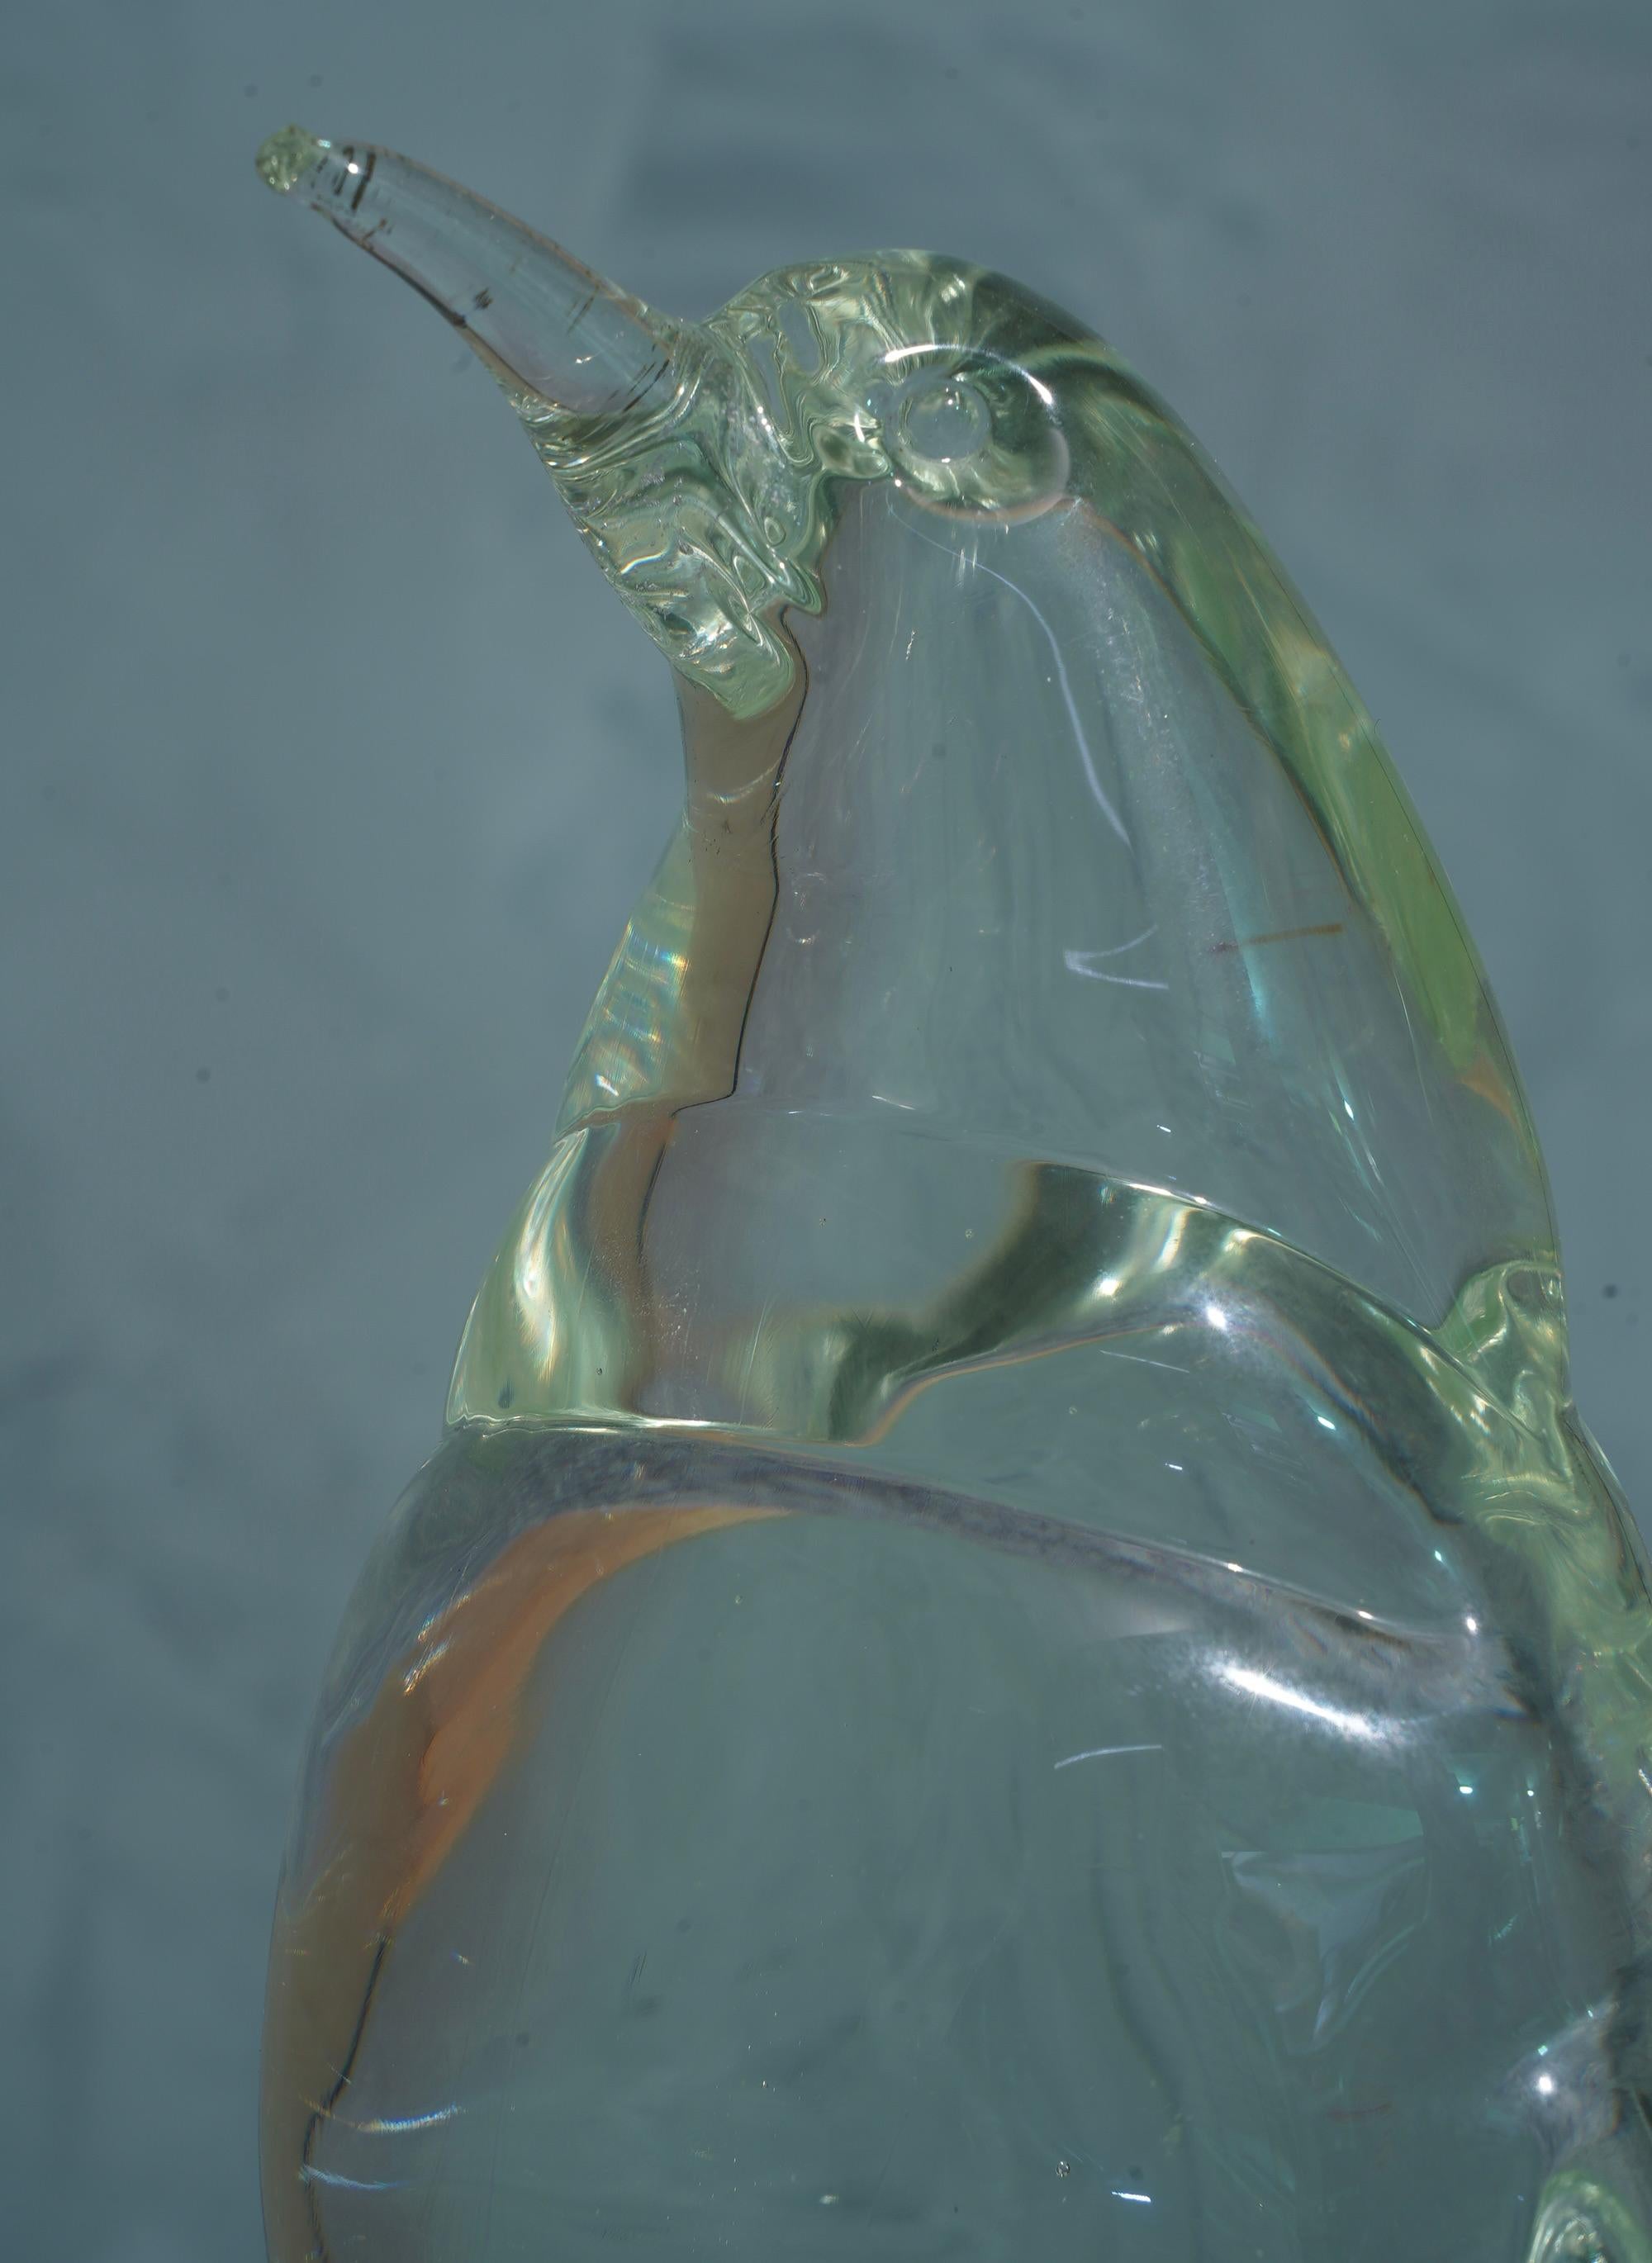 Beautiful Murano glass sculpture representing a penguin, with the head turned upwards.

The Murano glass sculpture has the same workmanship as a 